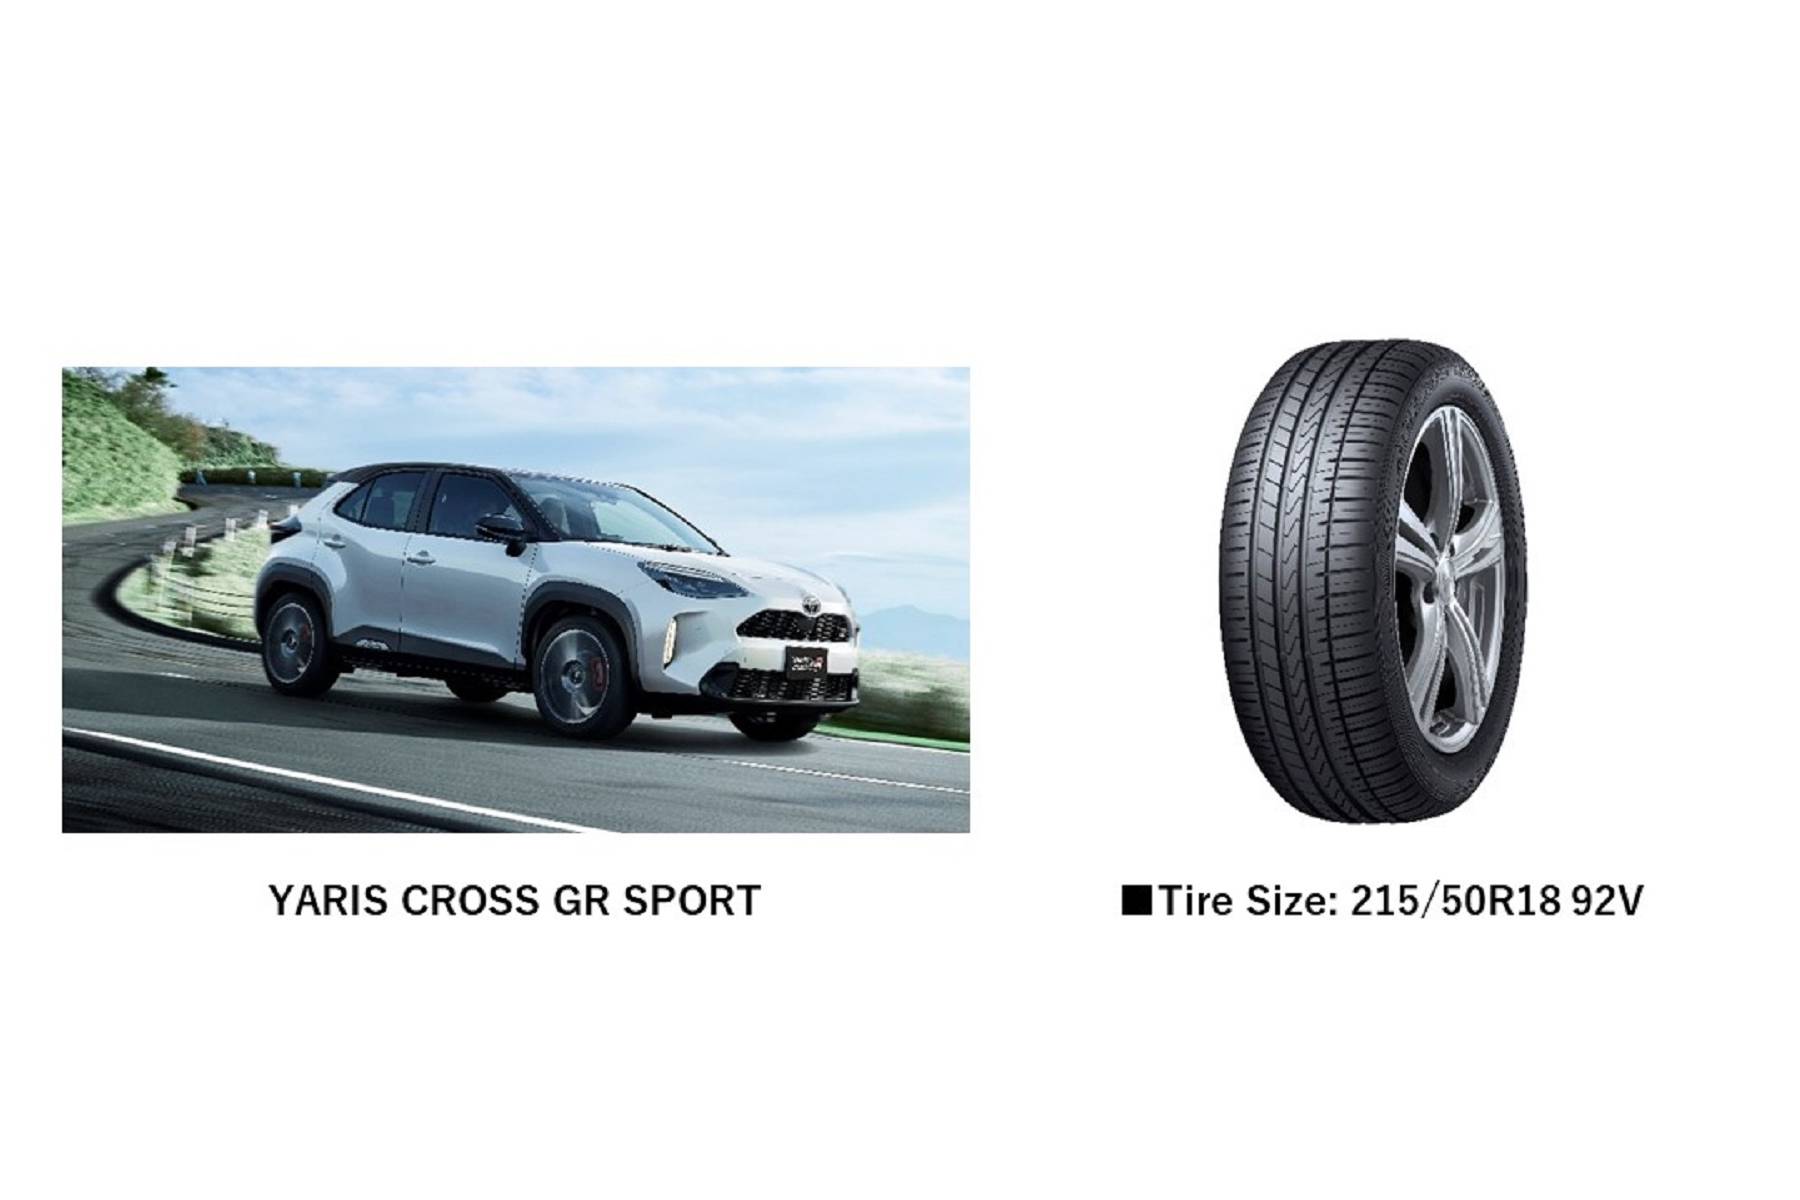 FALKEN “AZENIS FK510 SUV” Selected as Factory Standard Tires for the New  TOYOTA “YARIS CROSS GR SPORT”